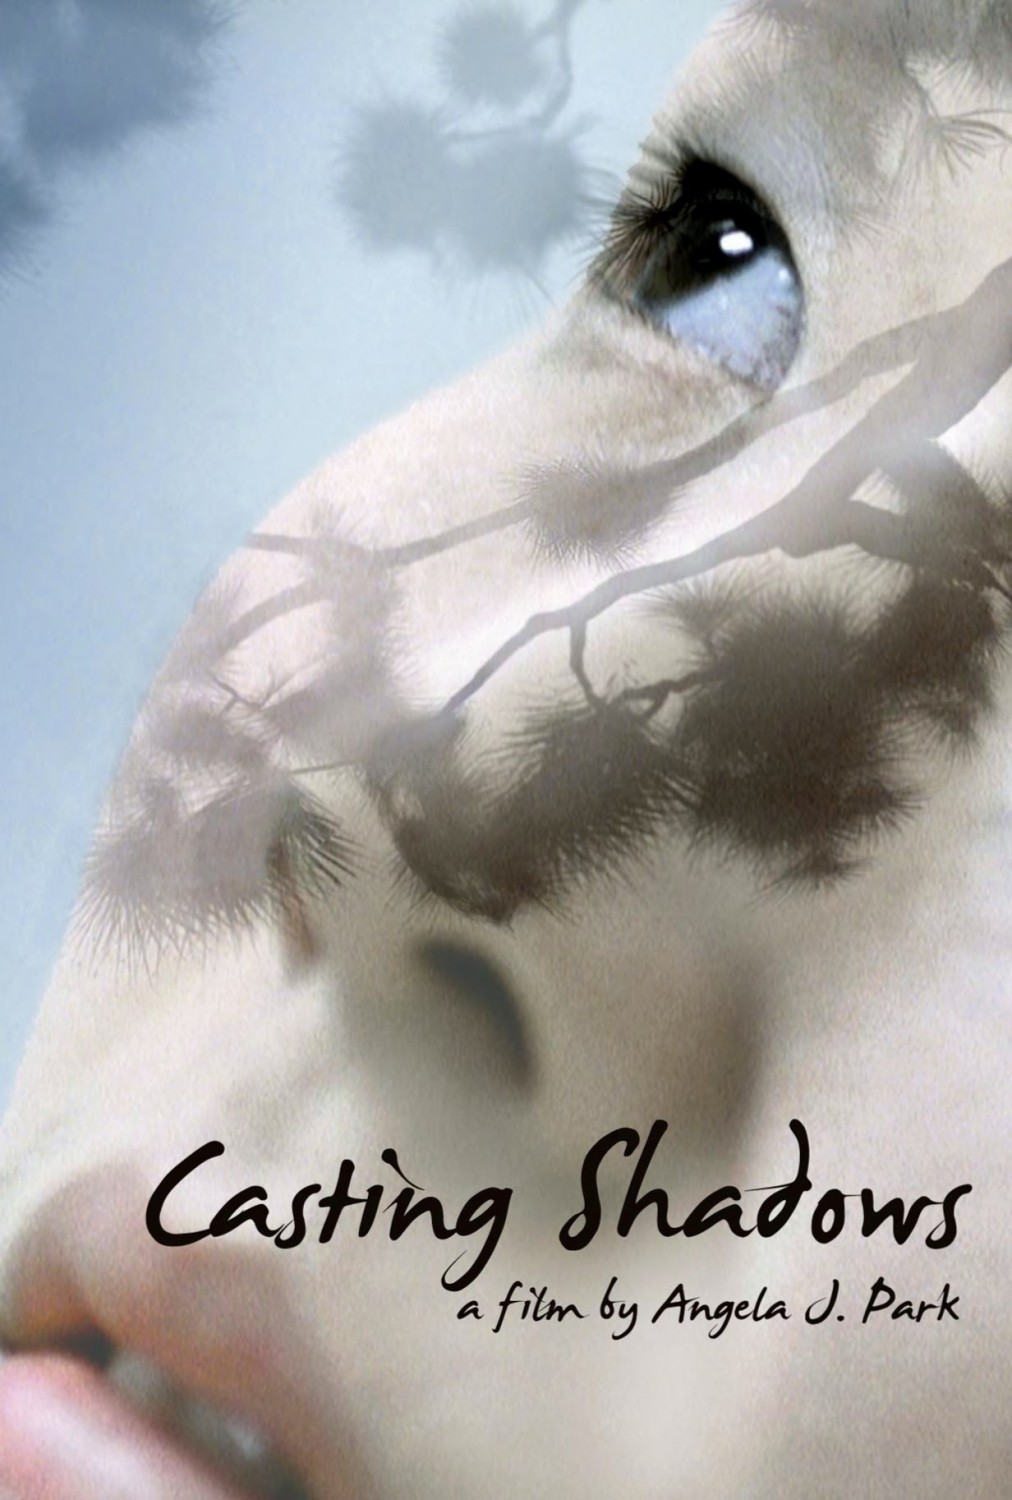 Extra Large Movie Poster Image for Casting Shadows